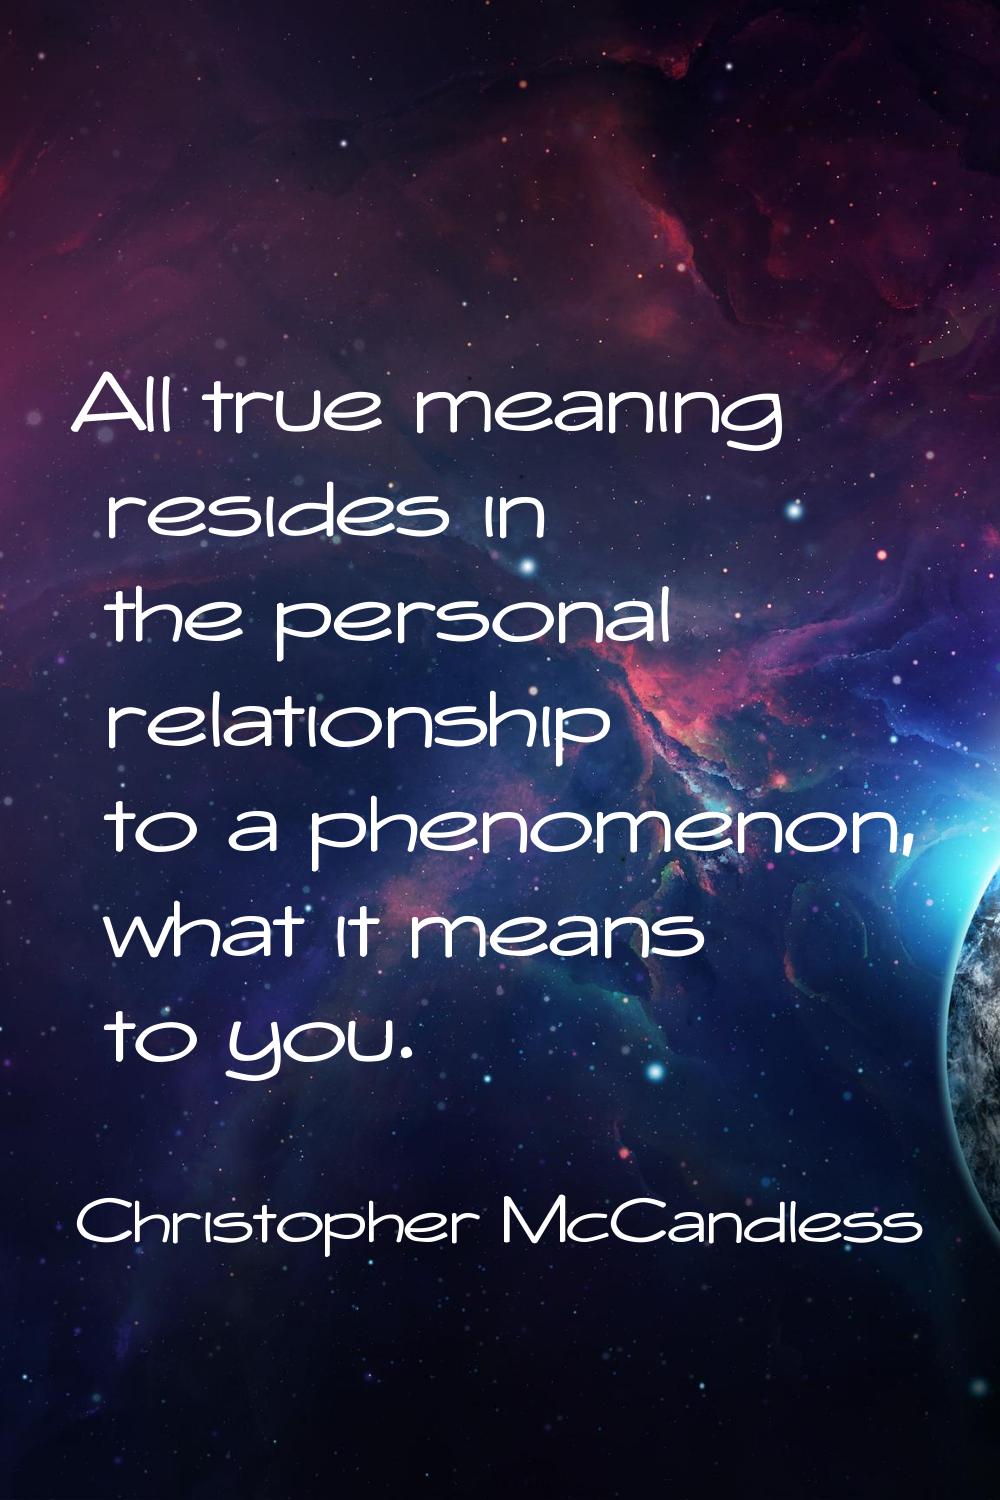 All true meaning resides in the personal relationship to a phenomenon, what it means to you.